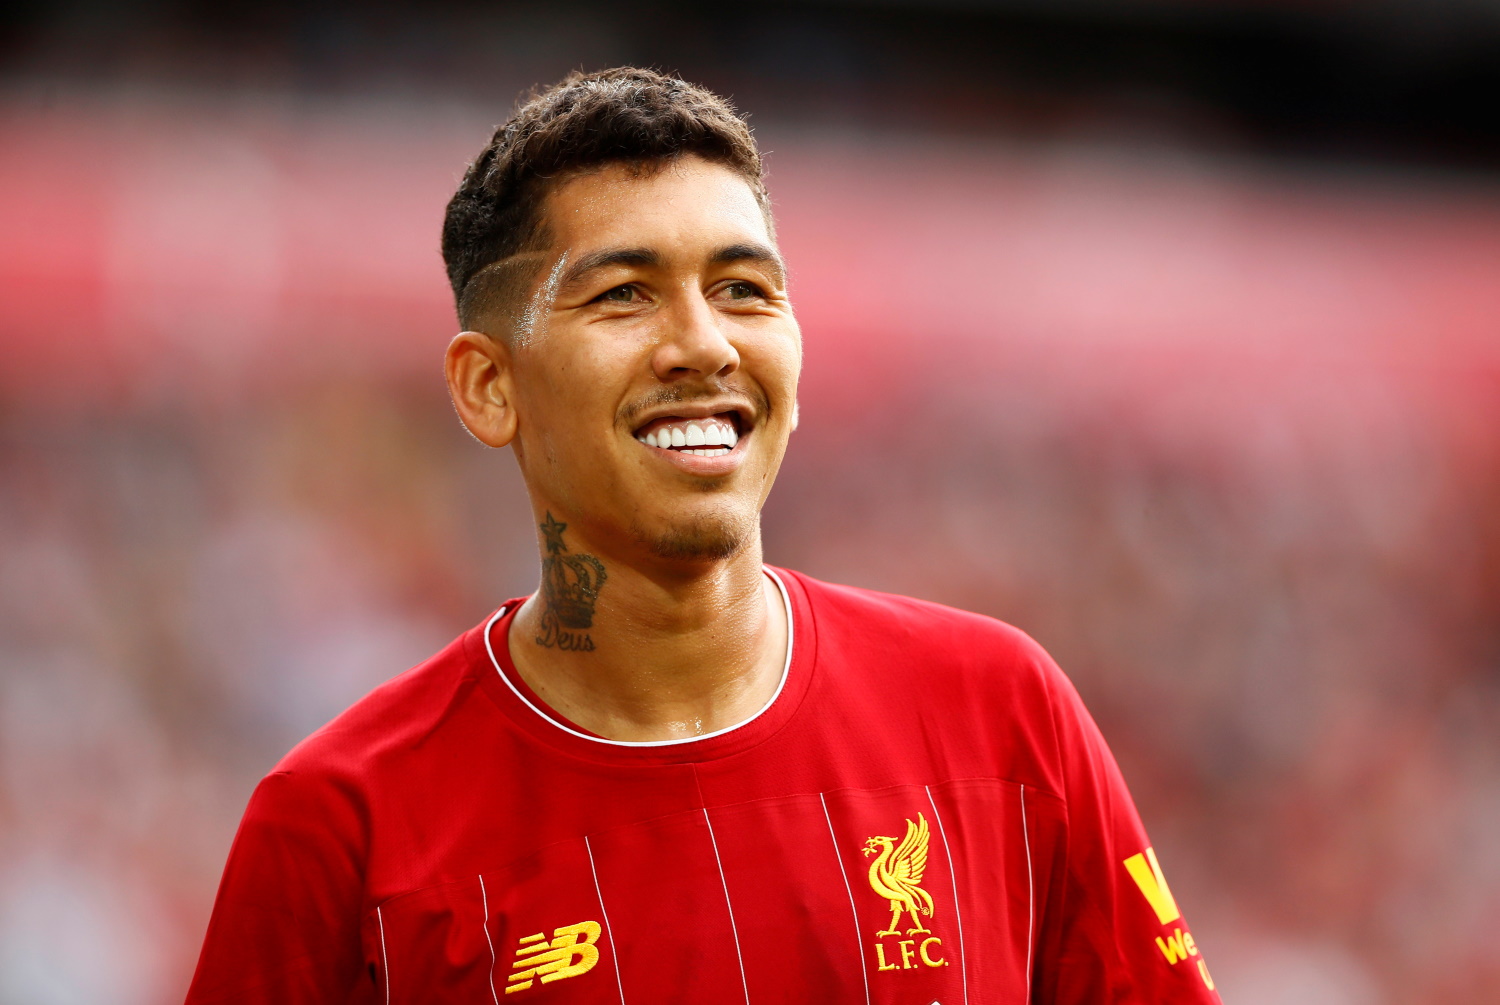 I’m not leaving Liverpool – Firmino